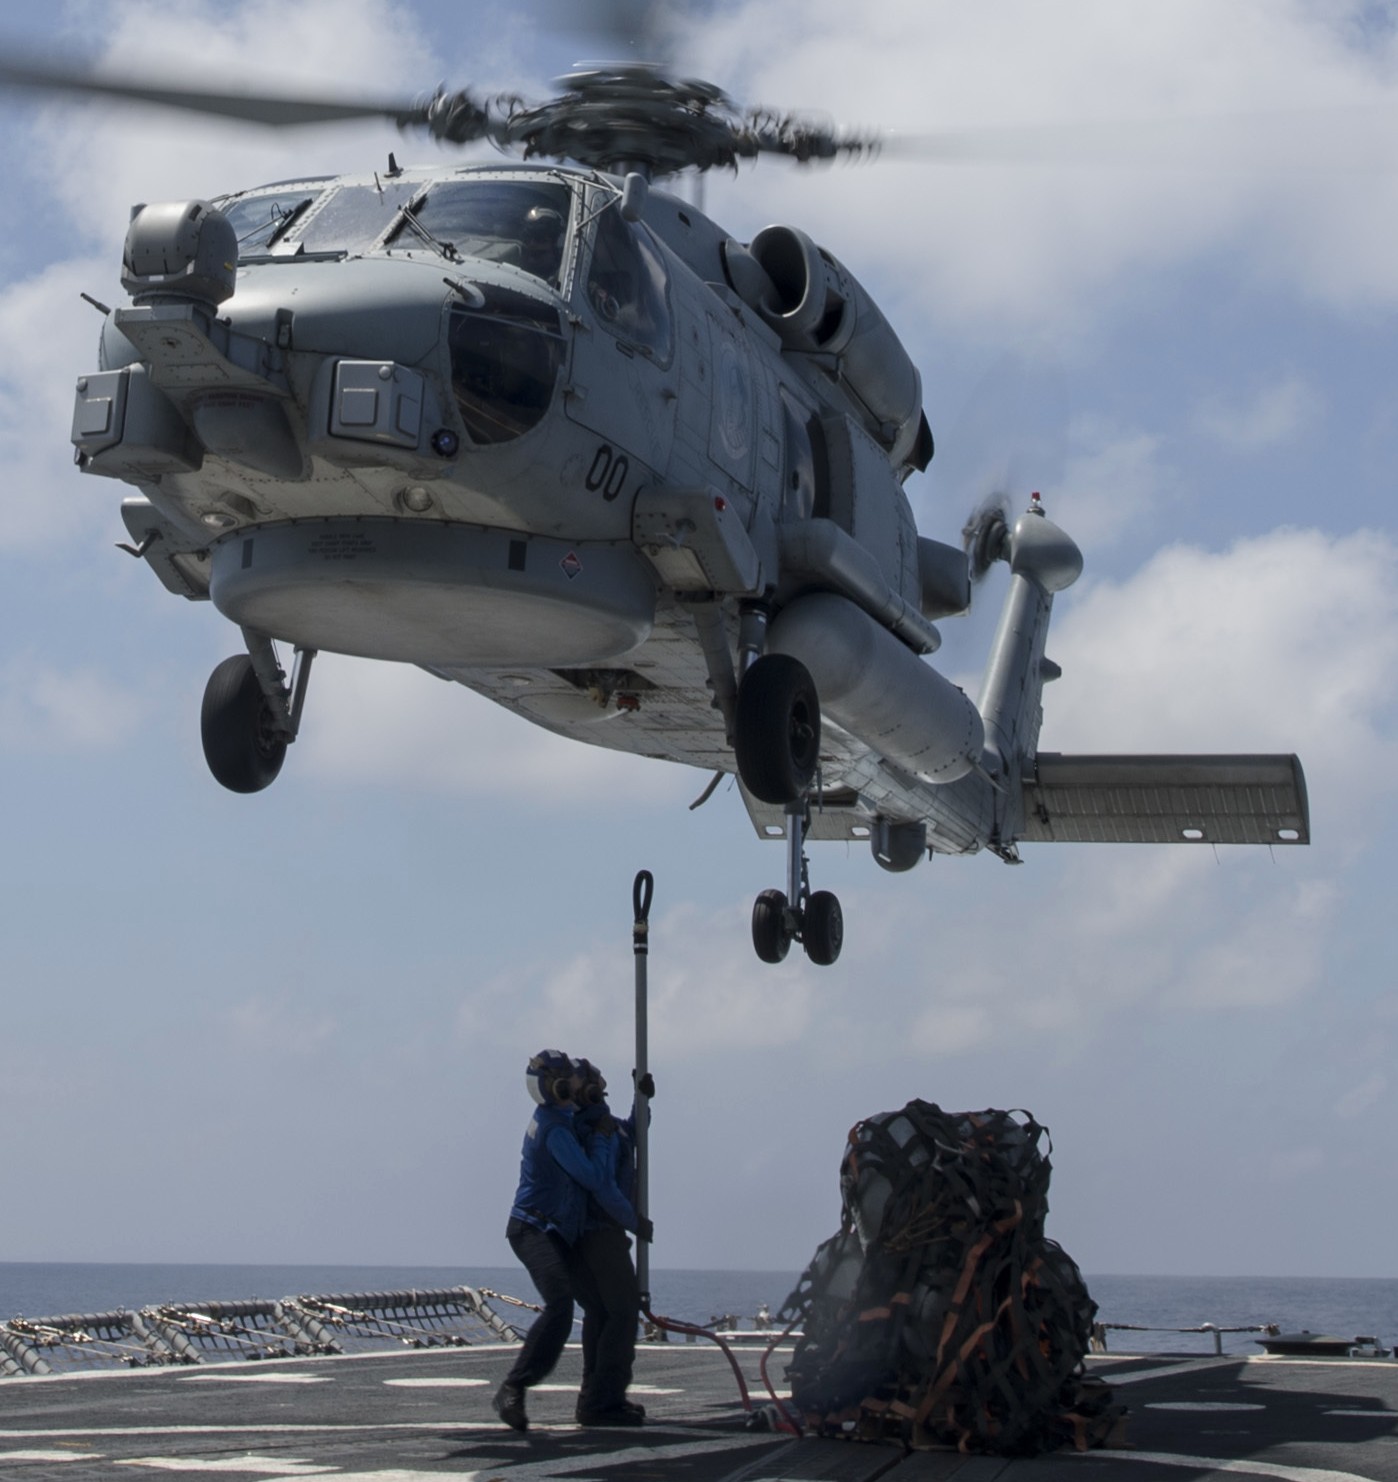 hsm-51 warlords helicopter maritime strike squadron mh-60r seahawk navy 2014 45